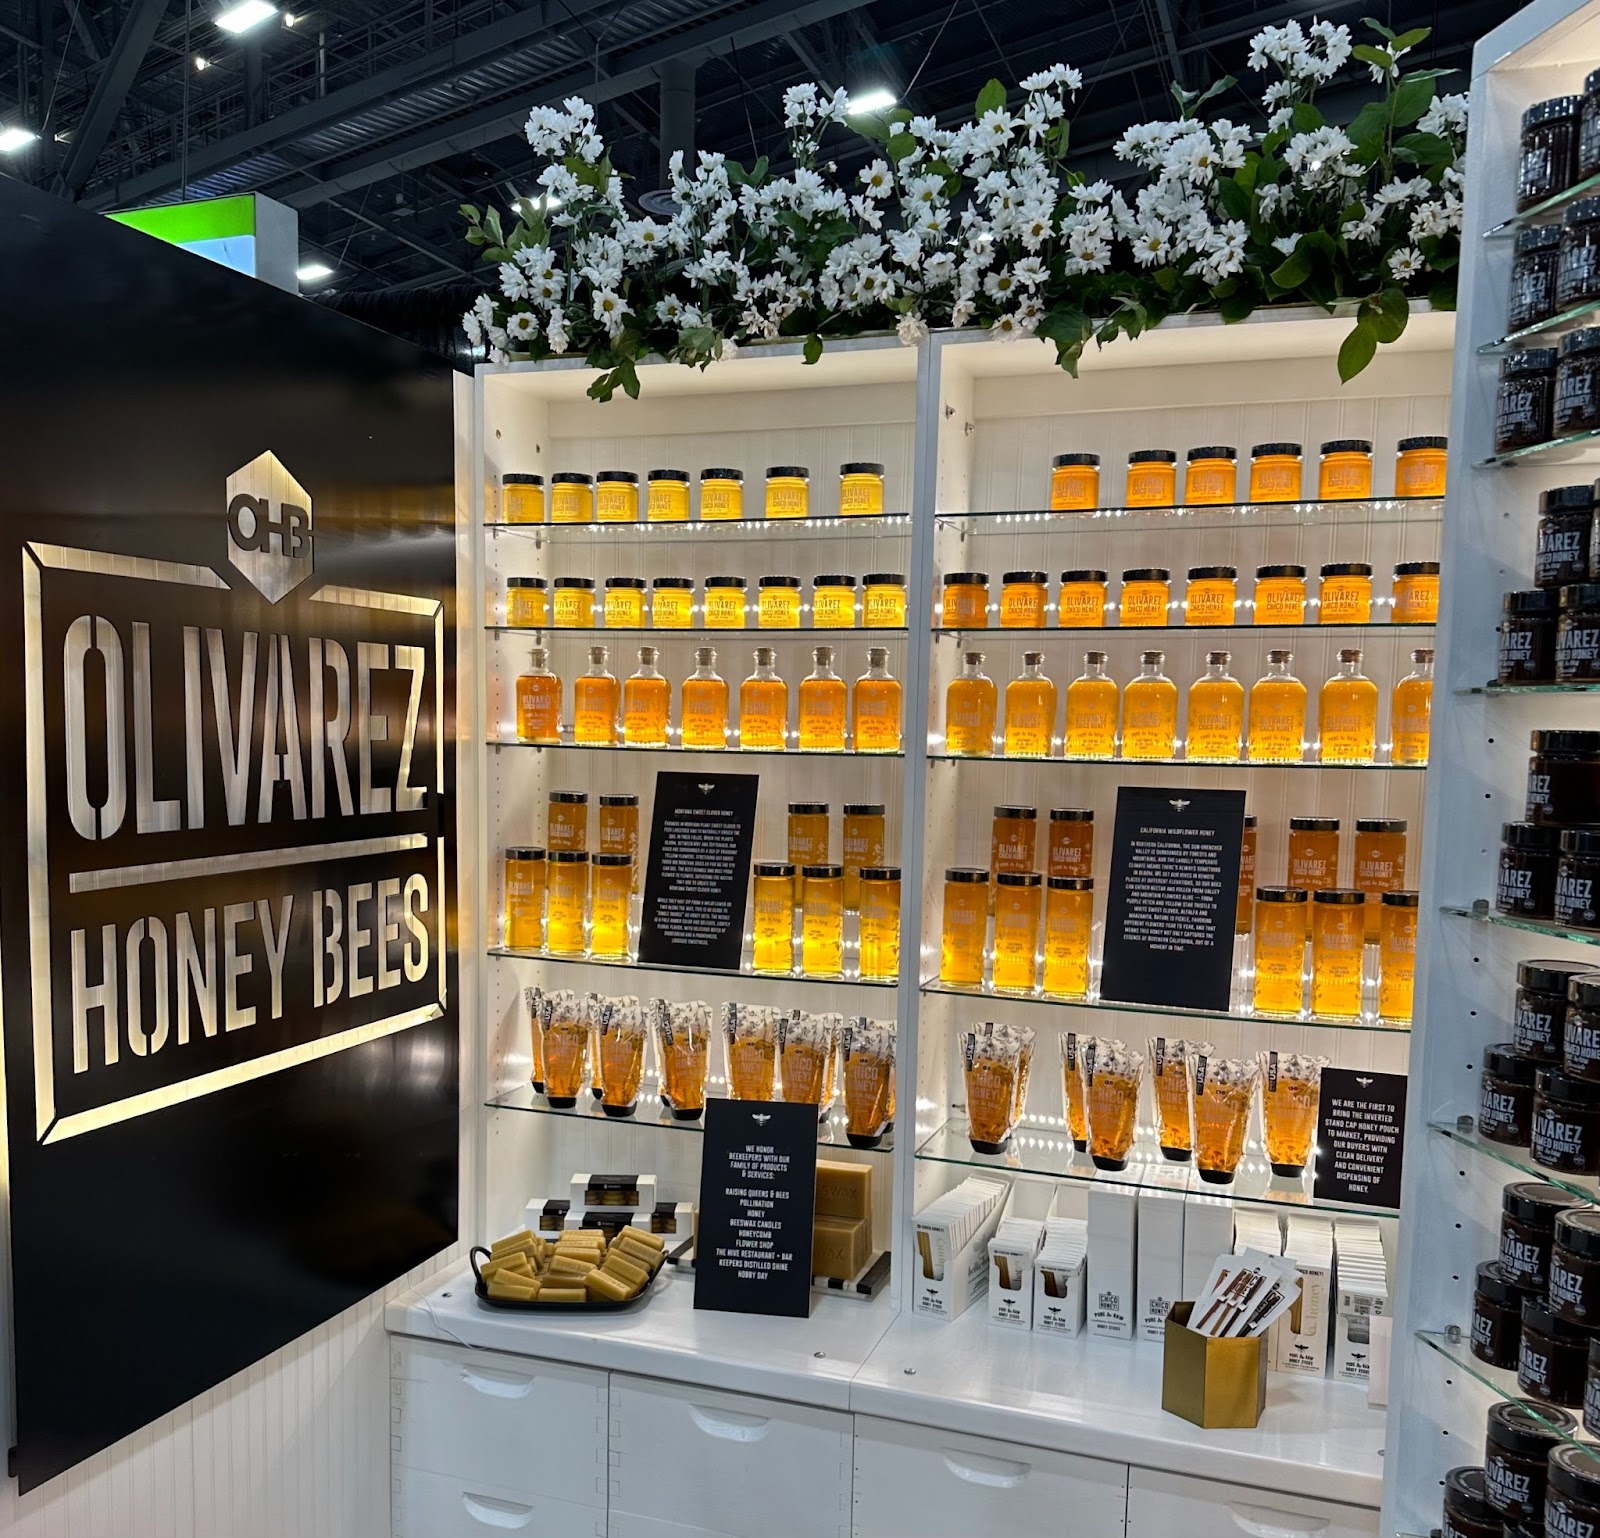 Olivarez Honey Bees Booth at Fancy Food Show